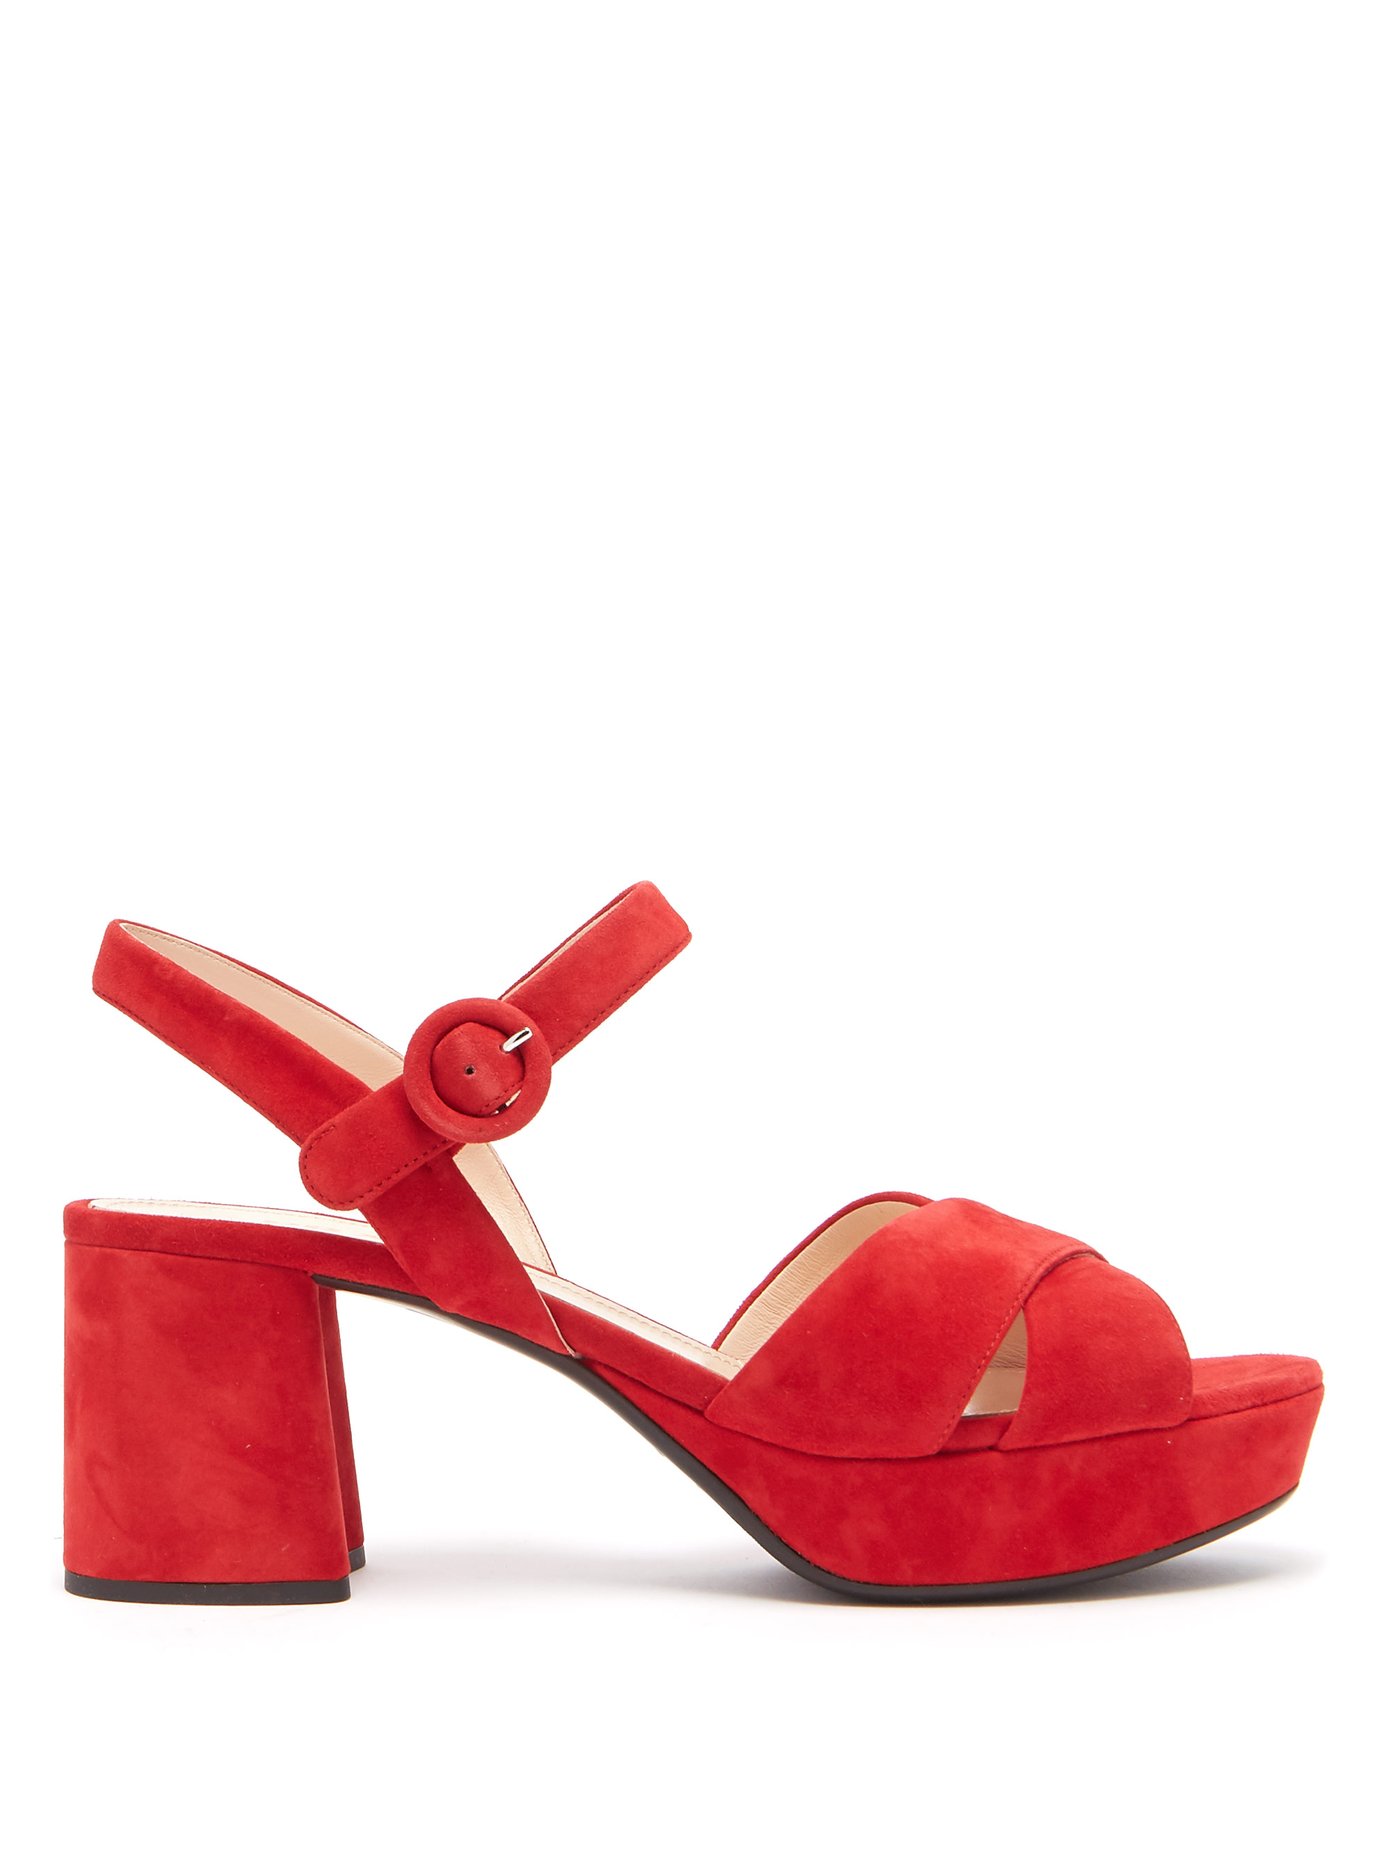 red suede sandals uk